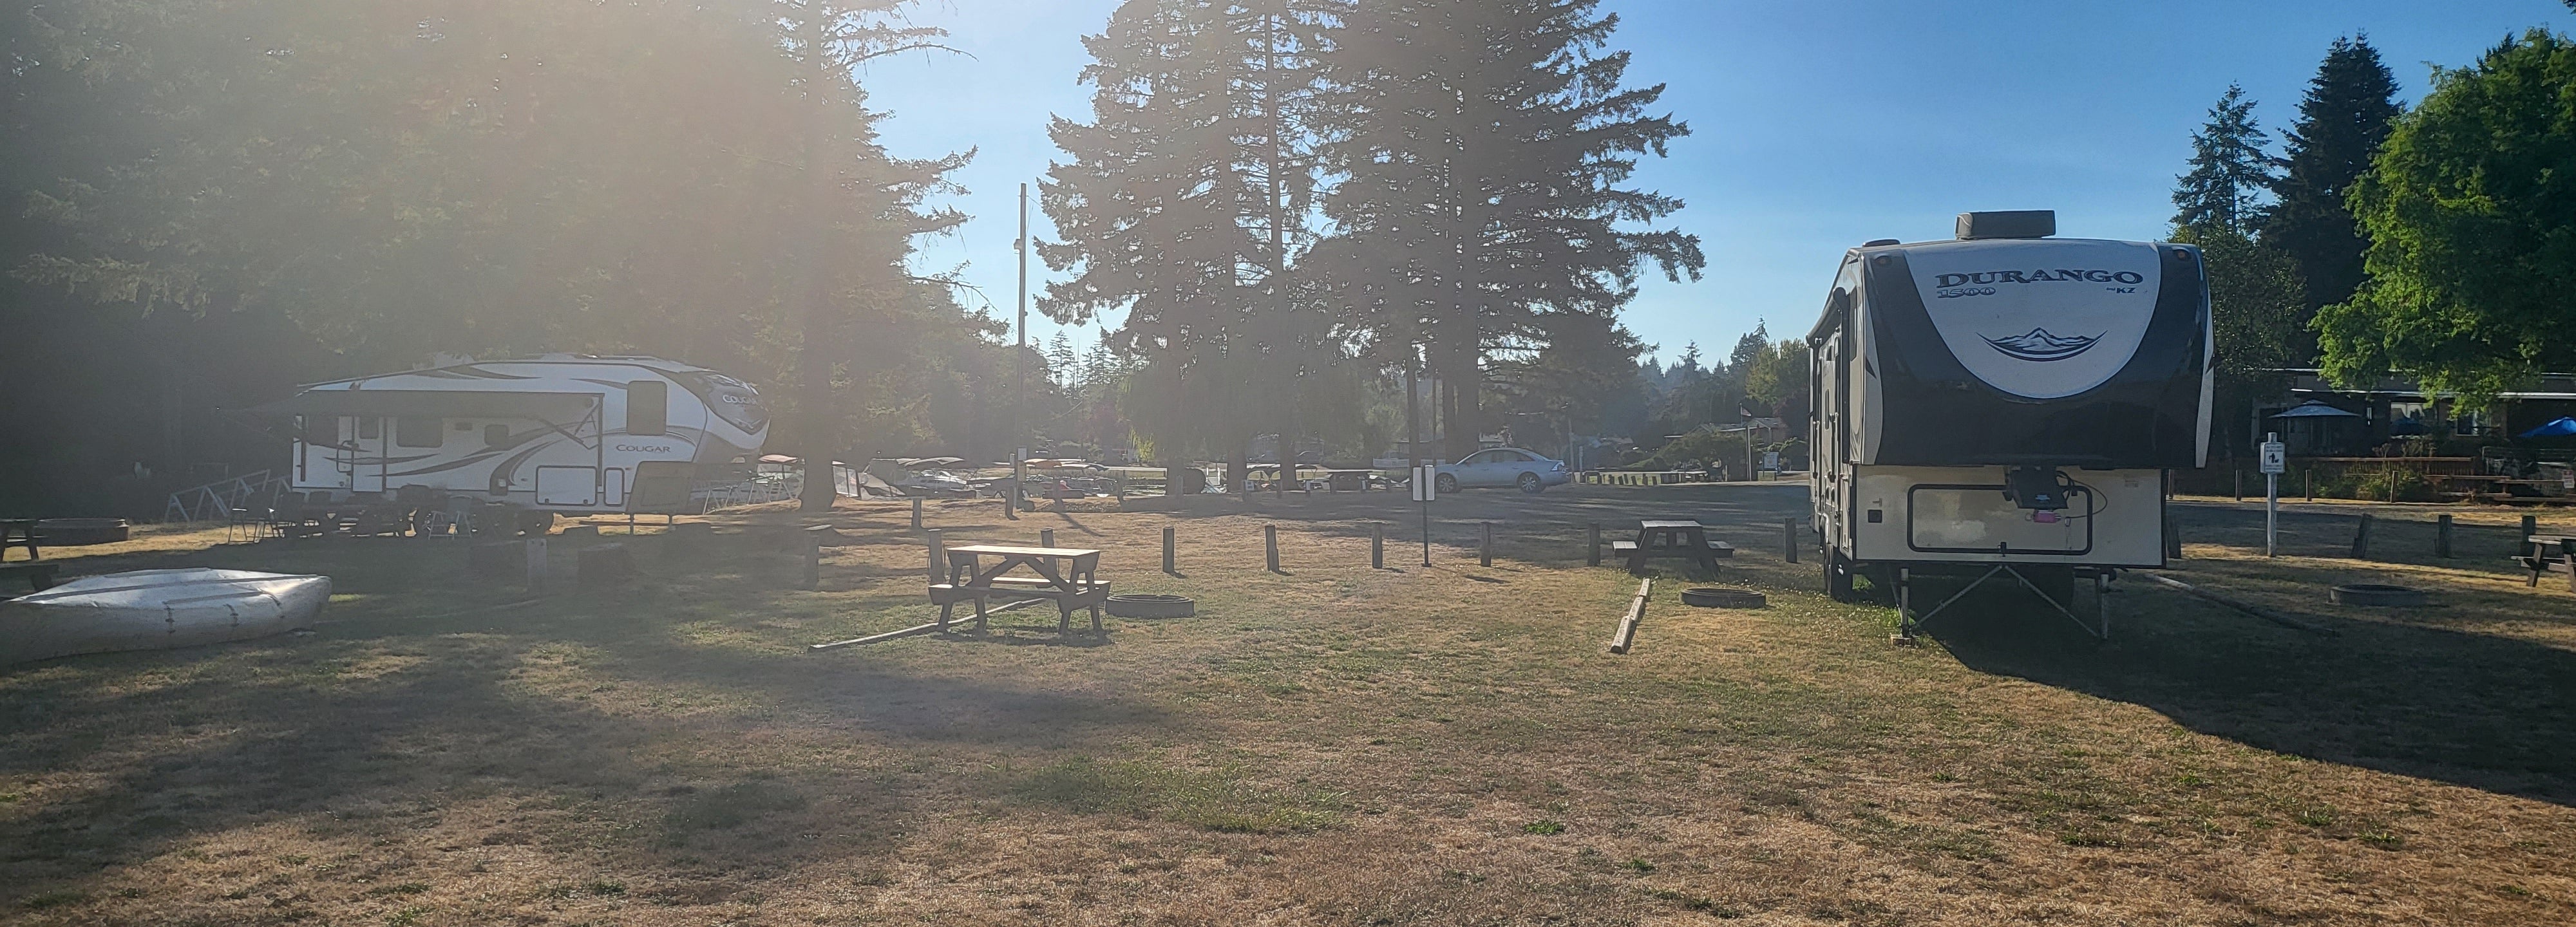 Camper submitted image from Fern Ridge Shores RV Park and Marina - 55+ RV Park - 1